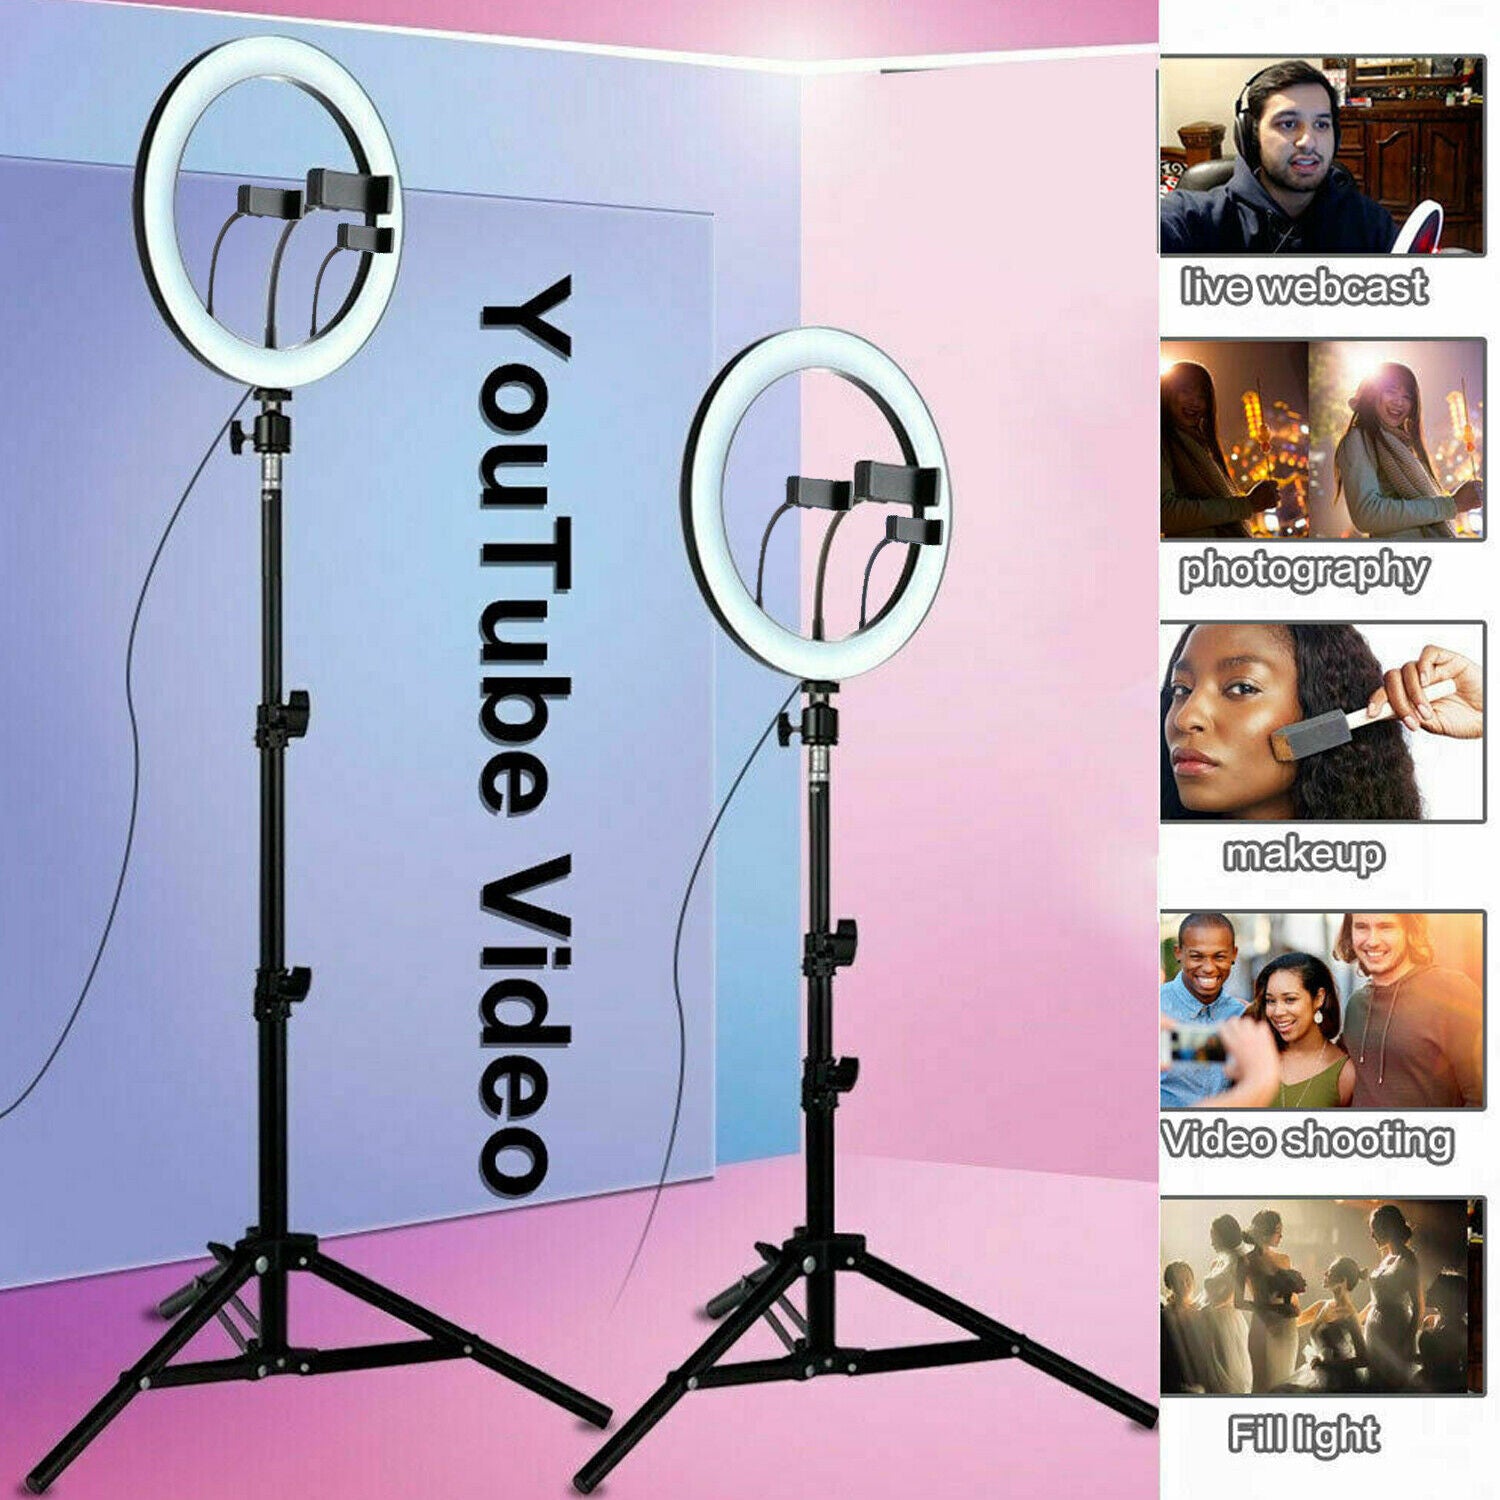 14'' LED Selfie Ring Light with 1.7M Tripod Stand Cell Phone Holder Makeup Live